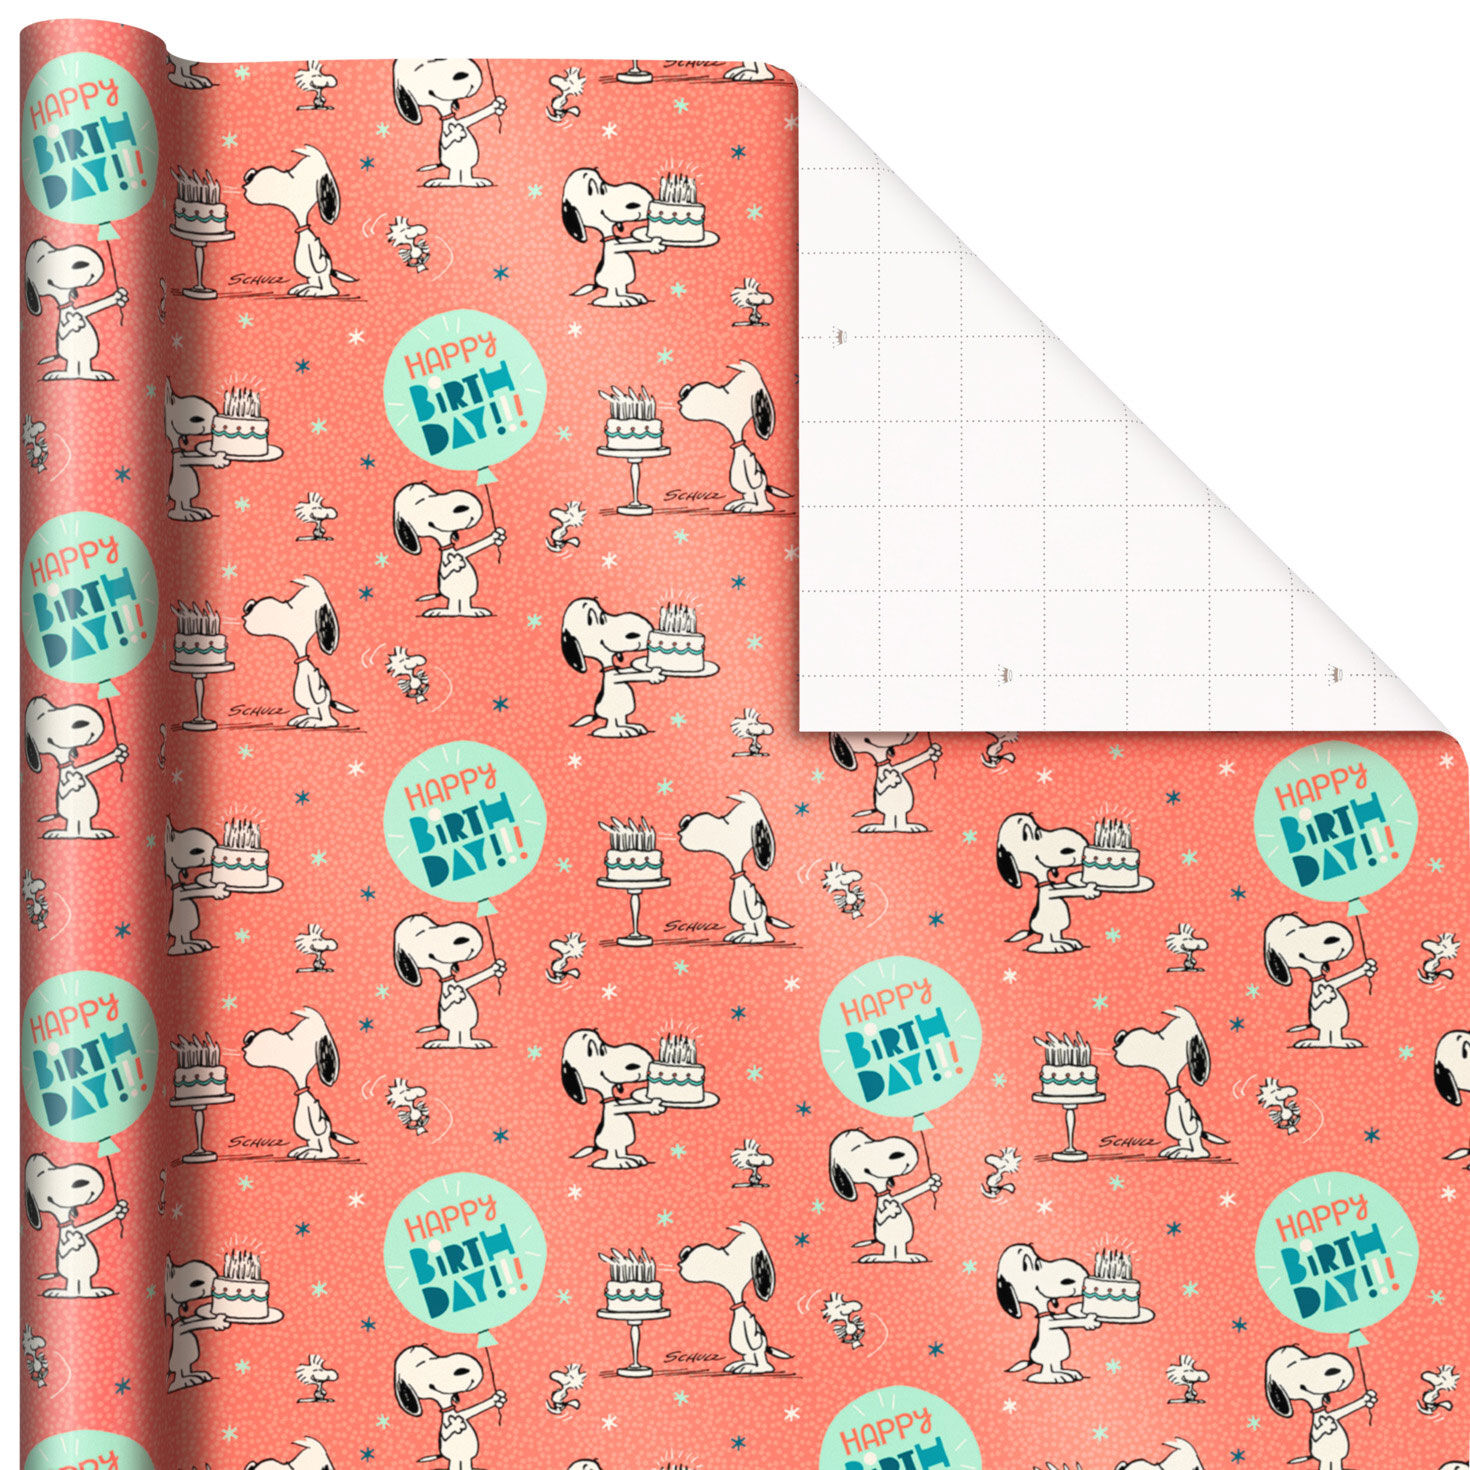 4 tags FIRST CLASS UK POST 2 x Birthday Wrapping Paper  Packets > 4 sheets 